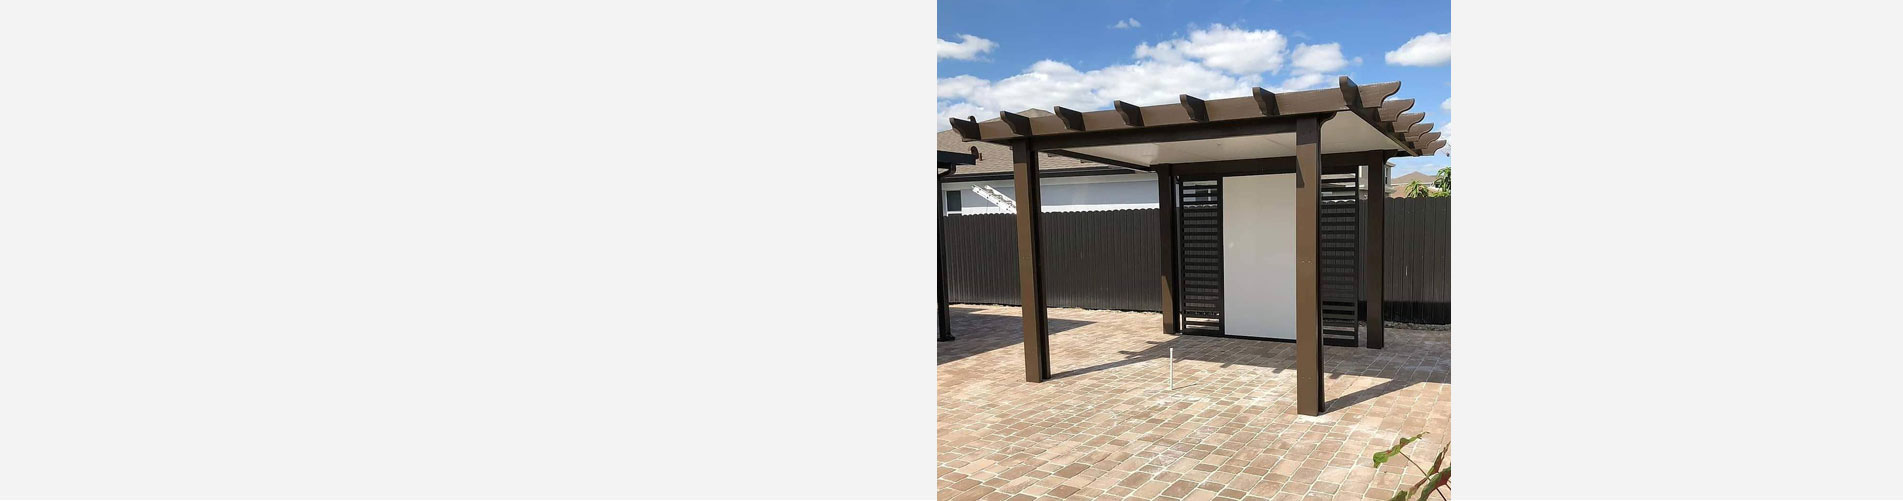 Experience the Beauty and Function of Aluminum Pergolas for Your Backyard Oasis